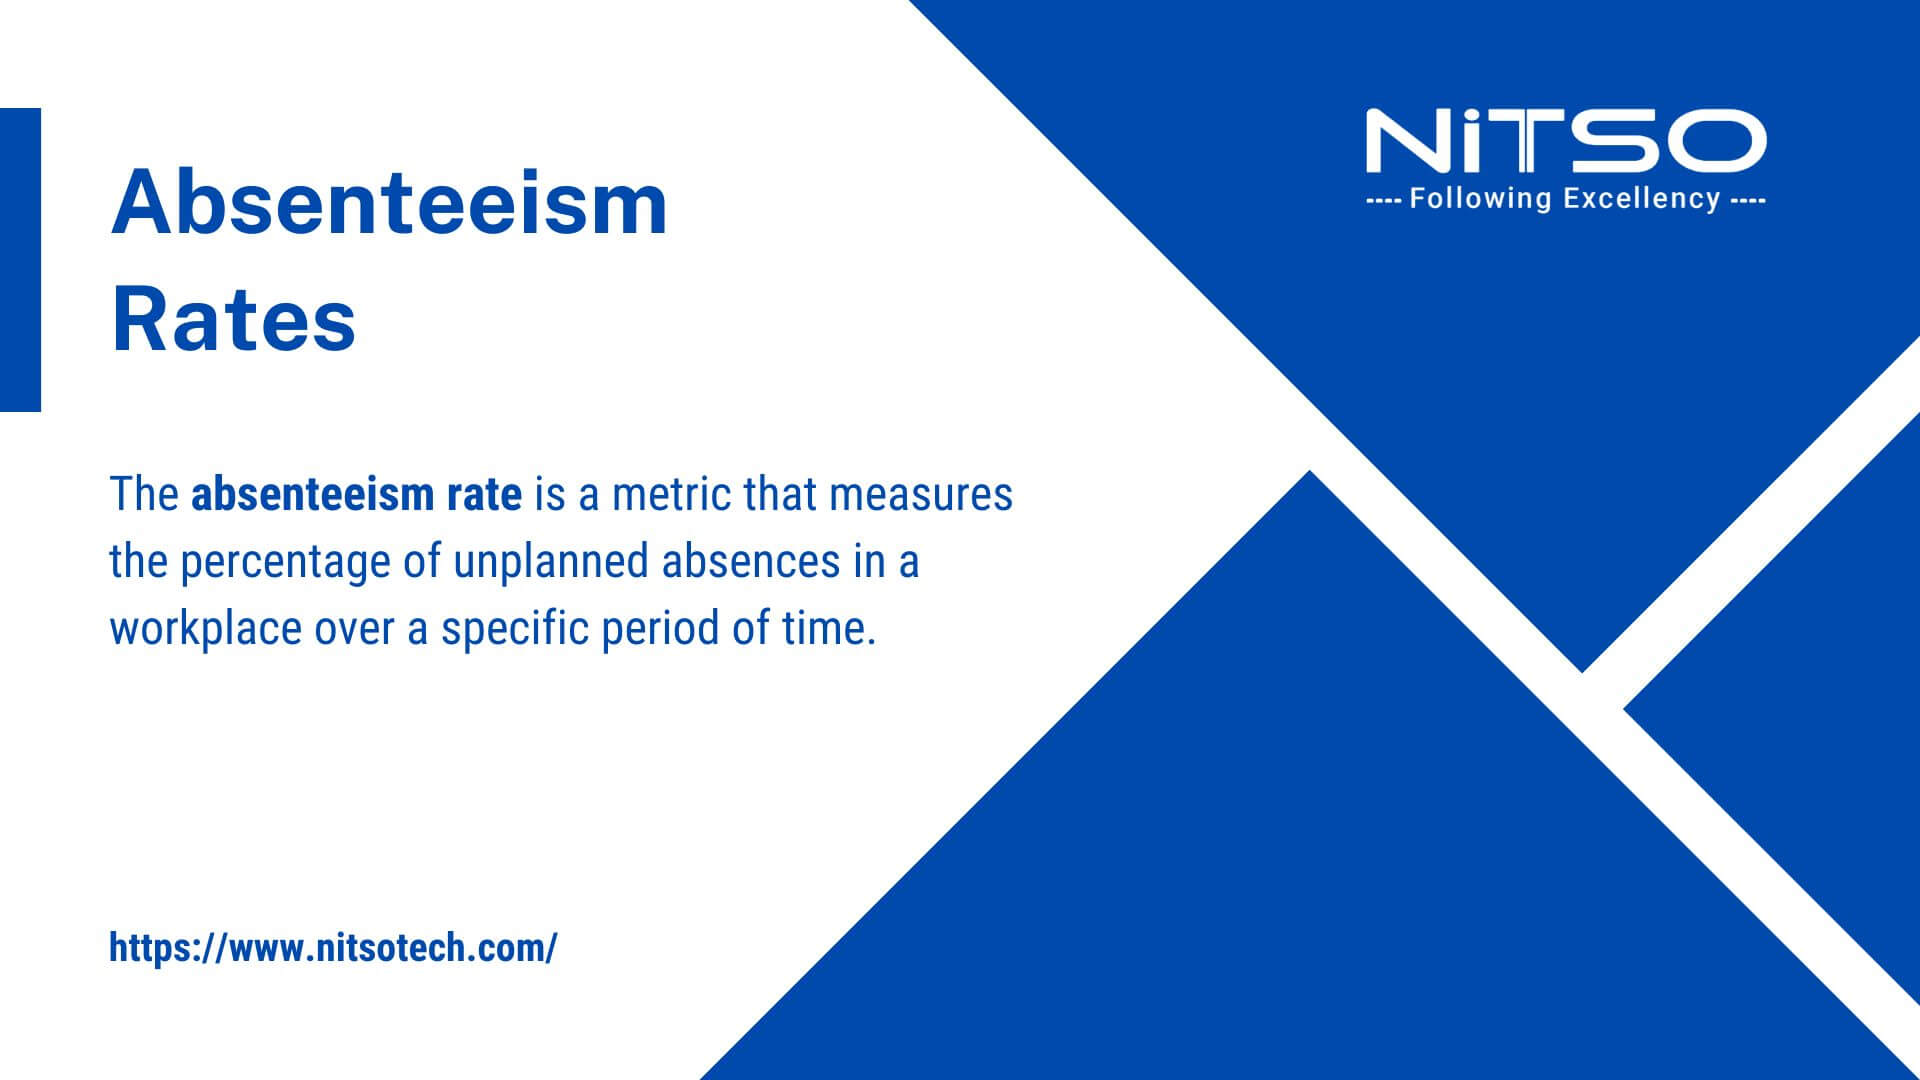 What is the Absenteeism Rate?